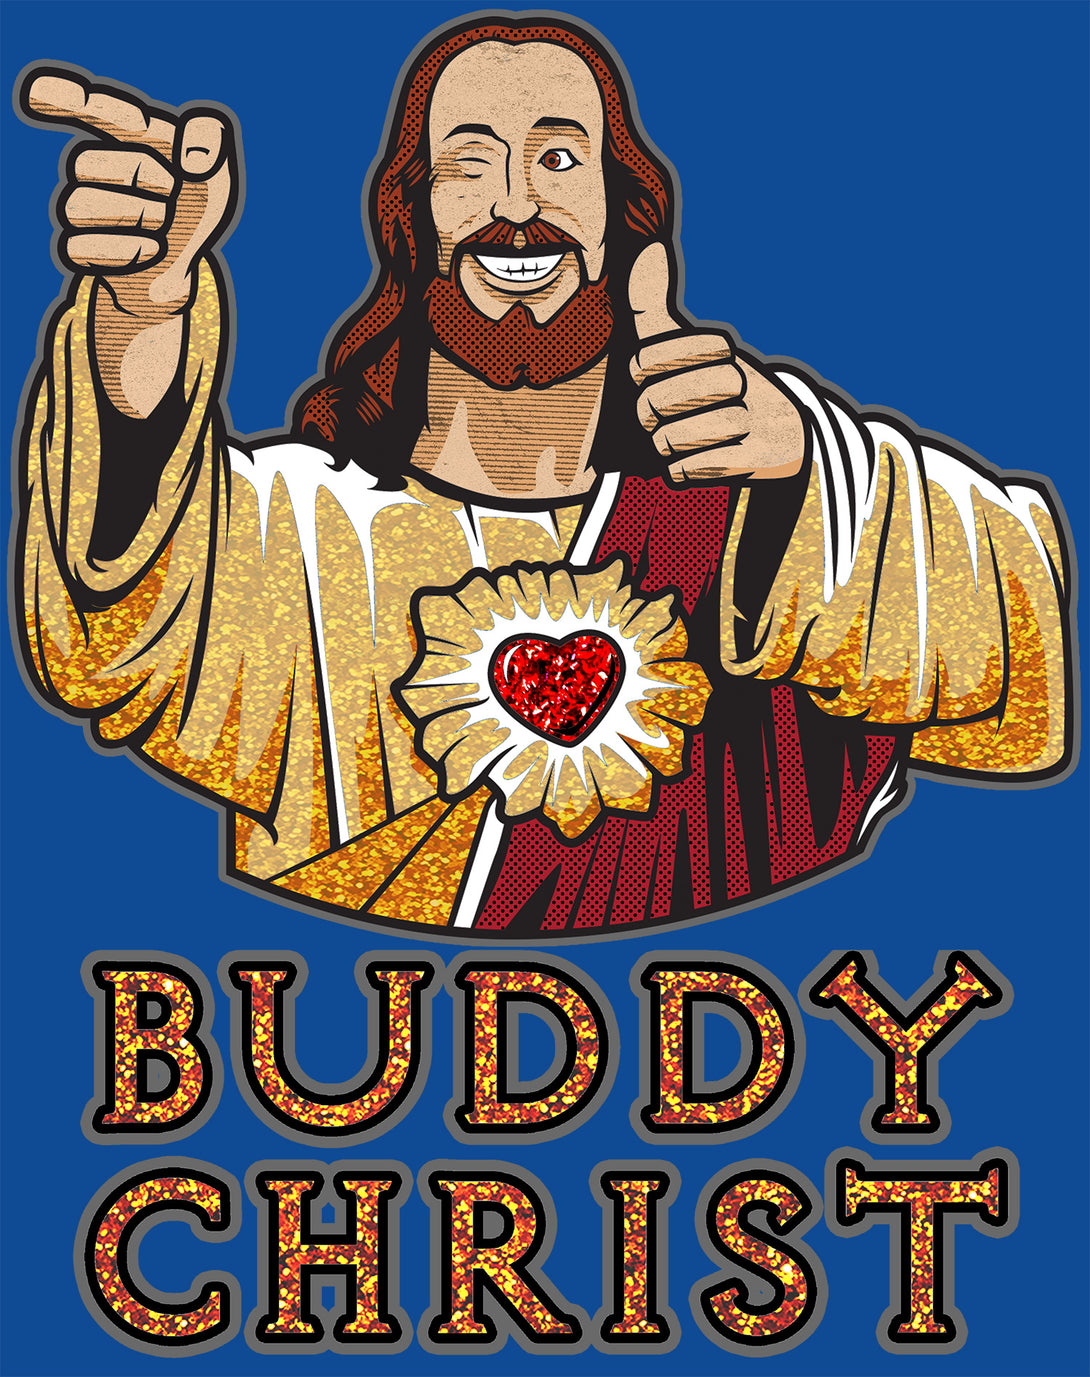 Kevin Smith View Askewniverse Buddy Christ Got Golden Wow Edition Official Men's T-Shirt Blue - Urban Species Design Close Up